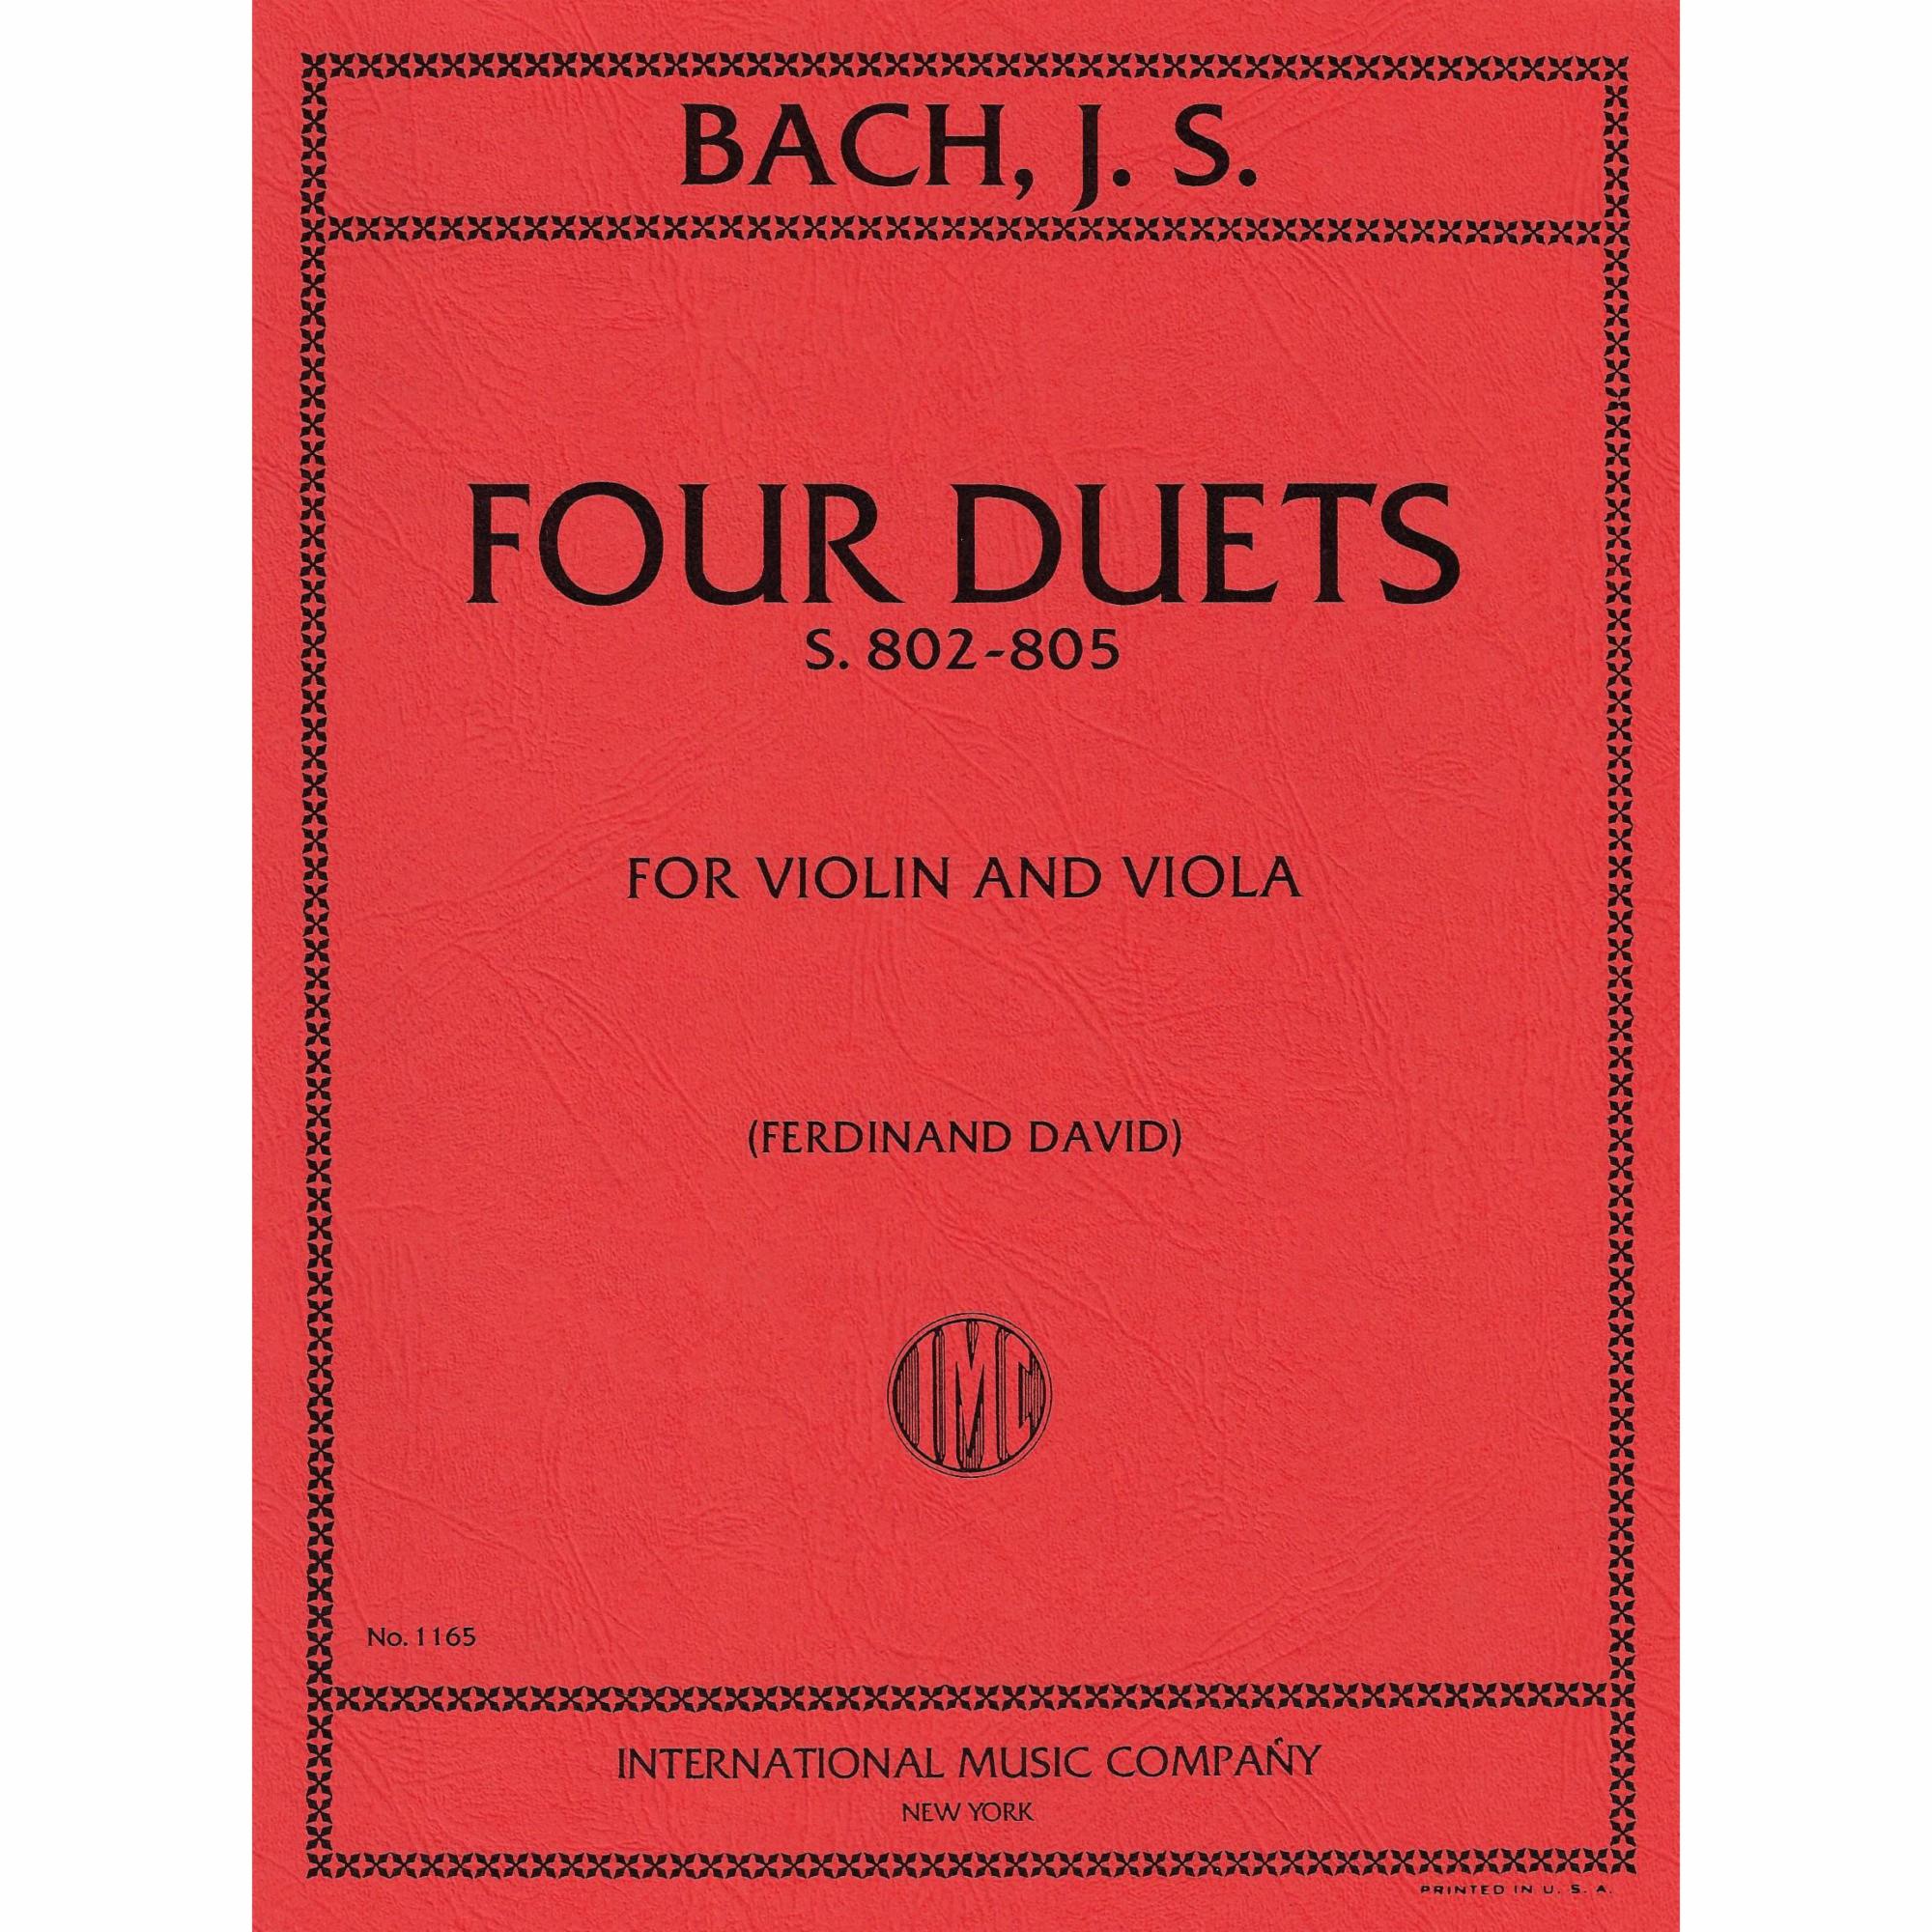 Bach -- Four Duets, S. 802-805 for Violin and Viola